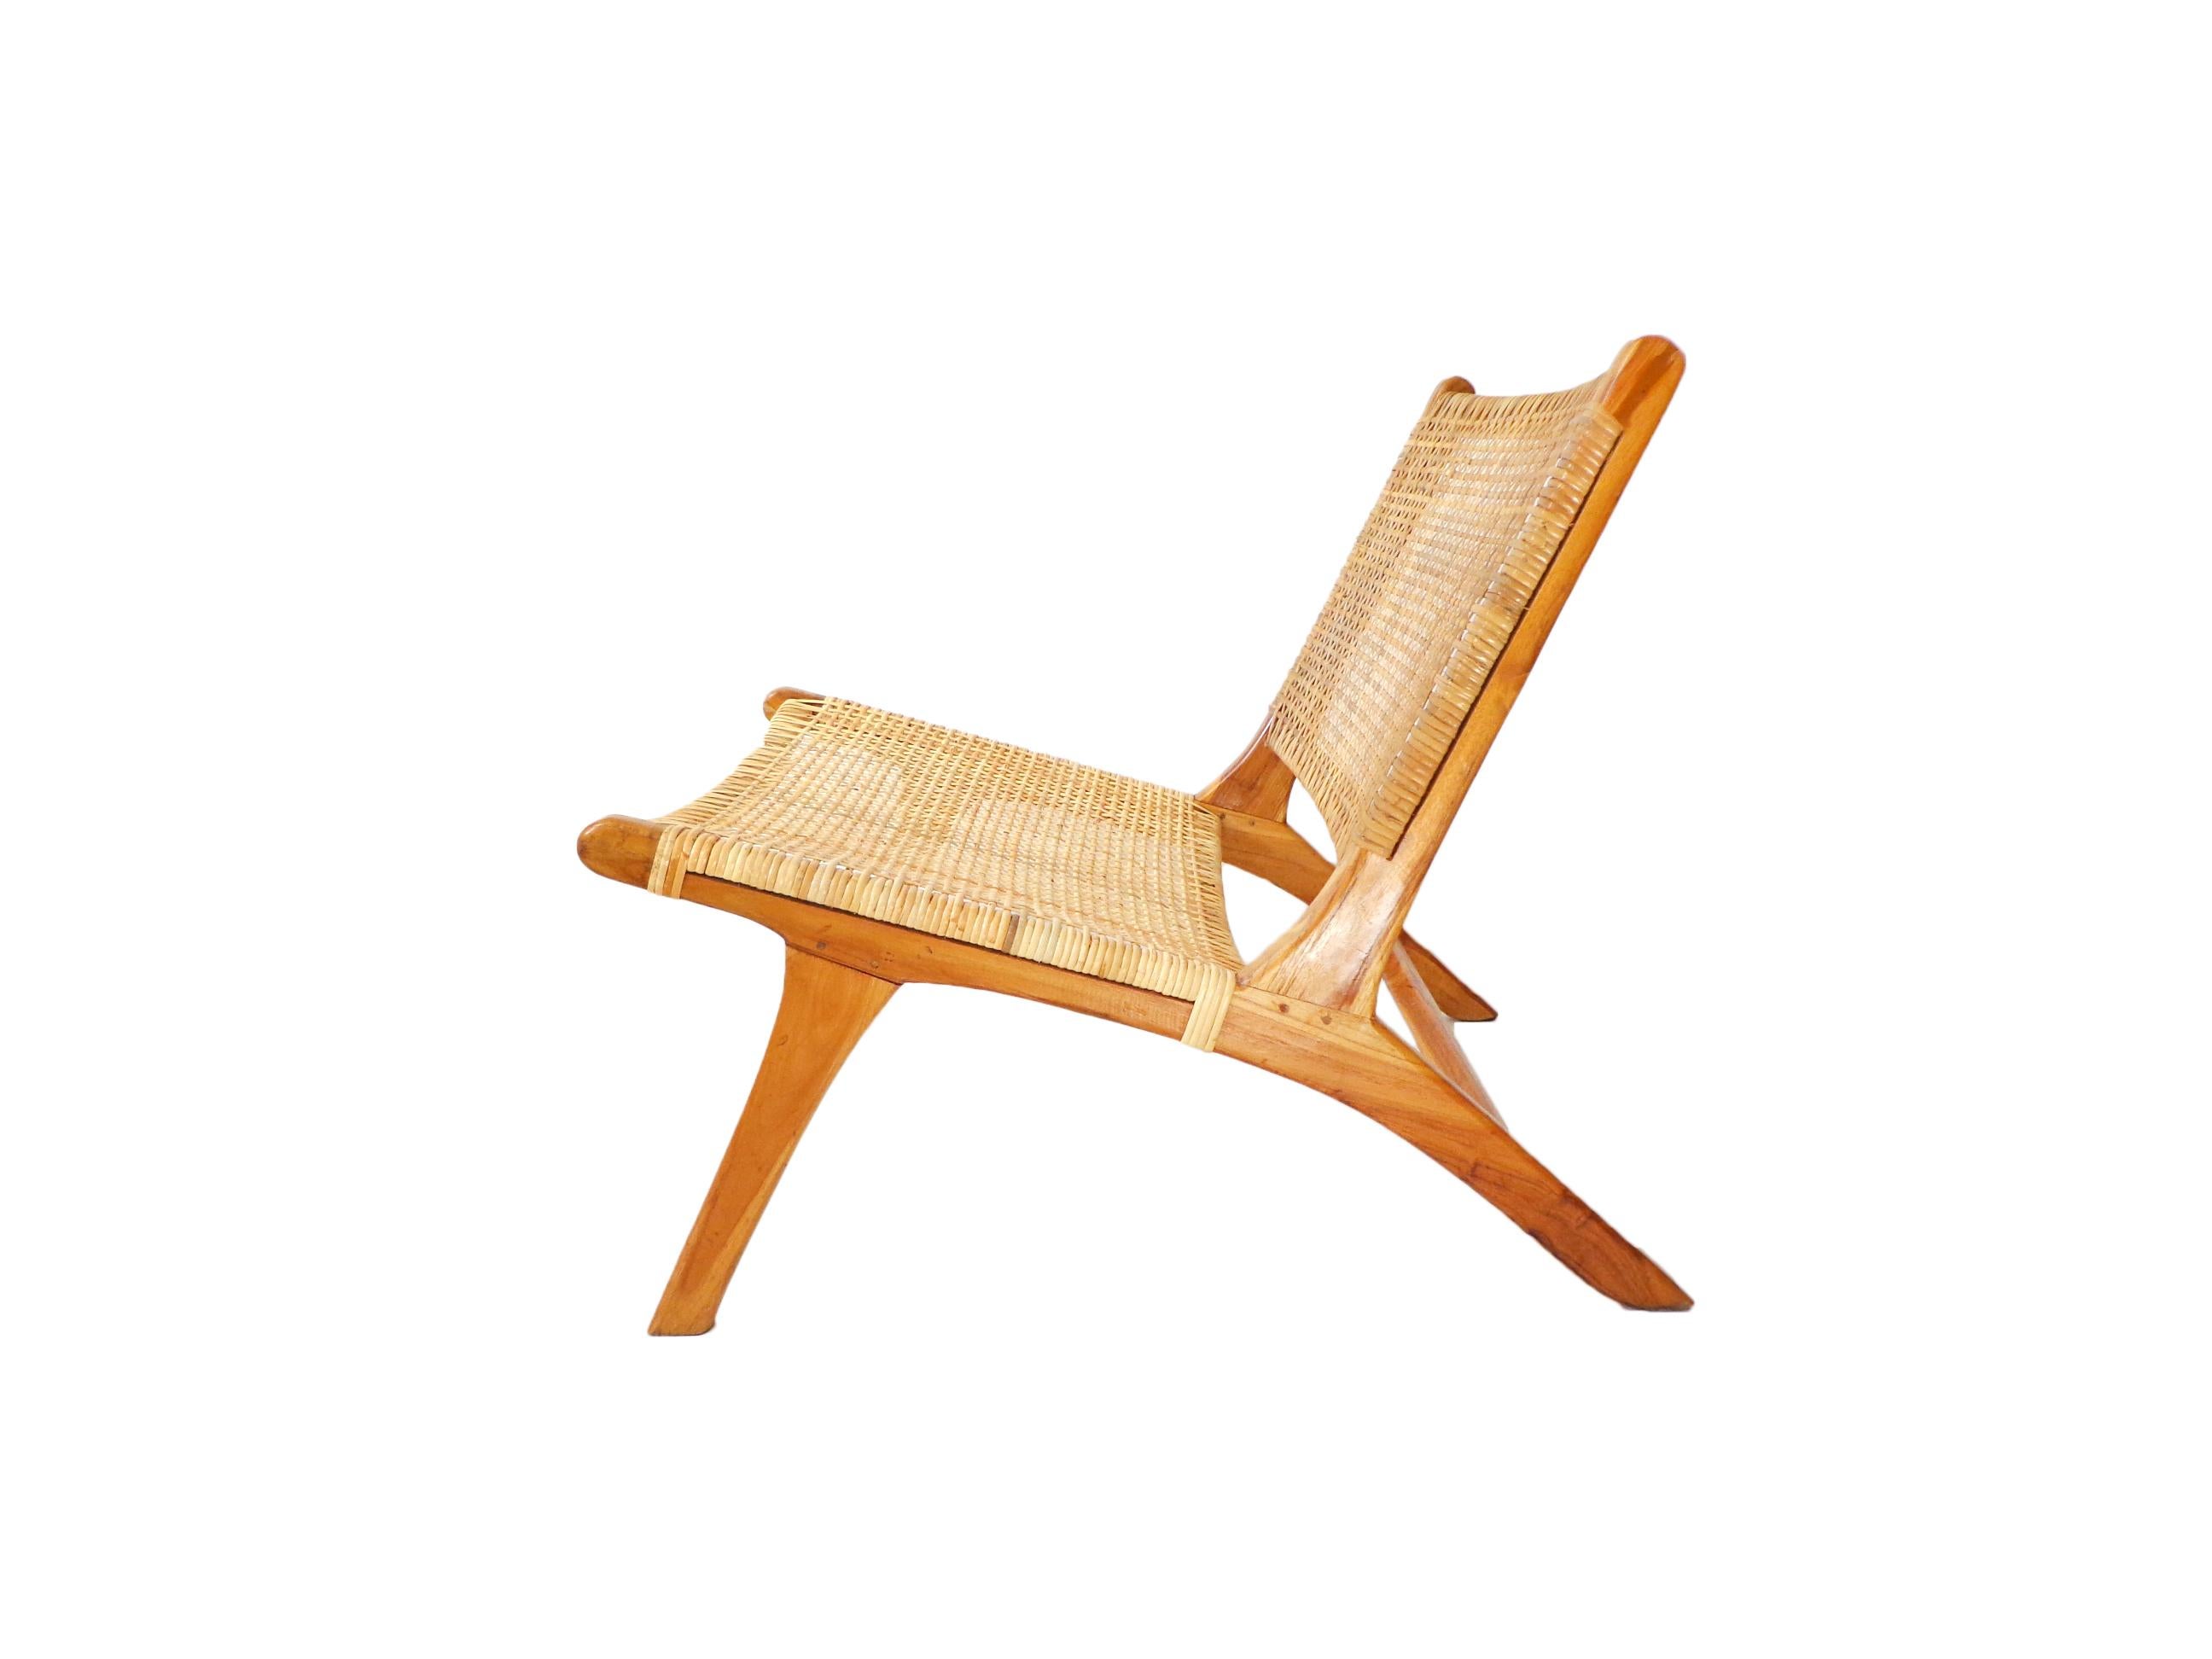 Lounge chair, cane and solid wood, natural and handmade easy chair. Very comfortable. Minimalistic design.

